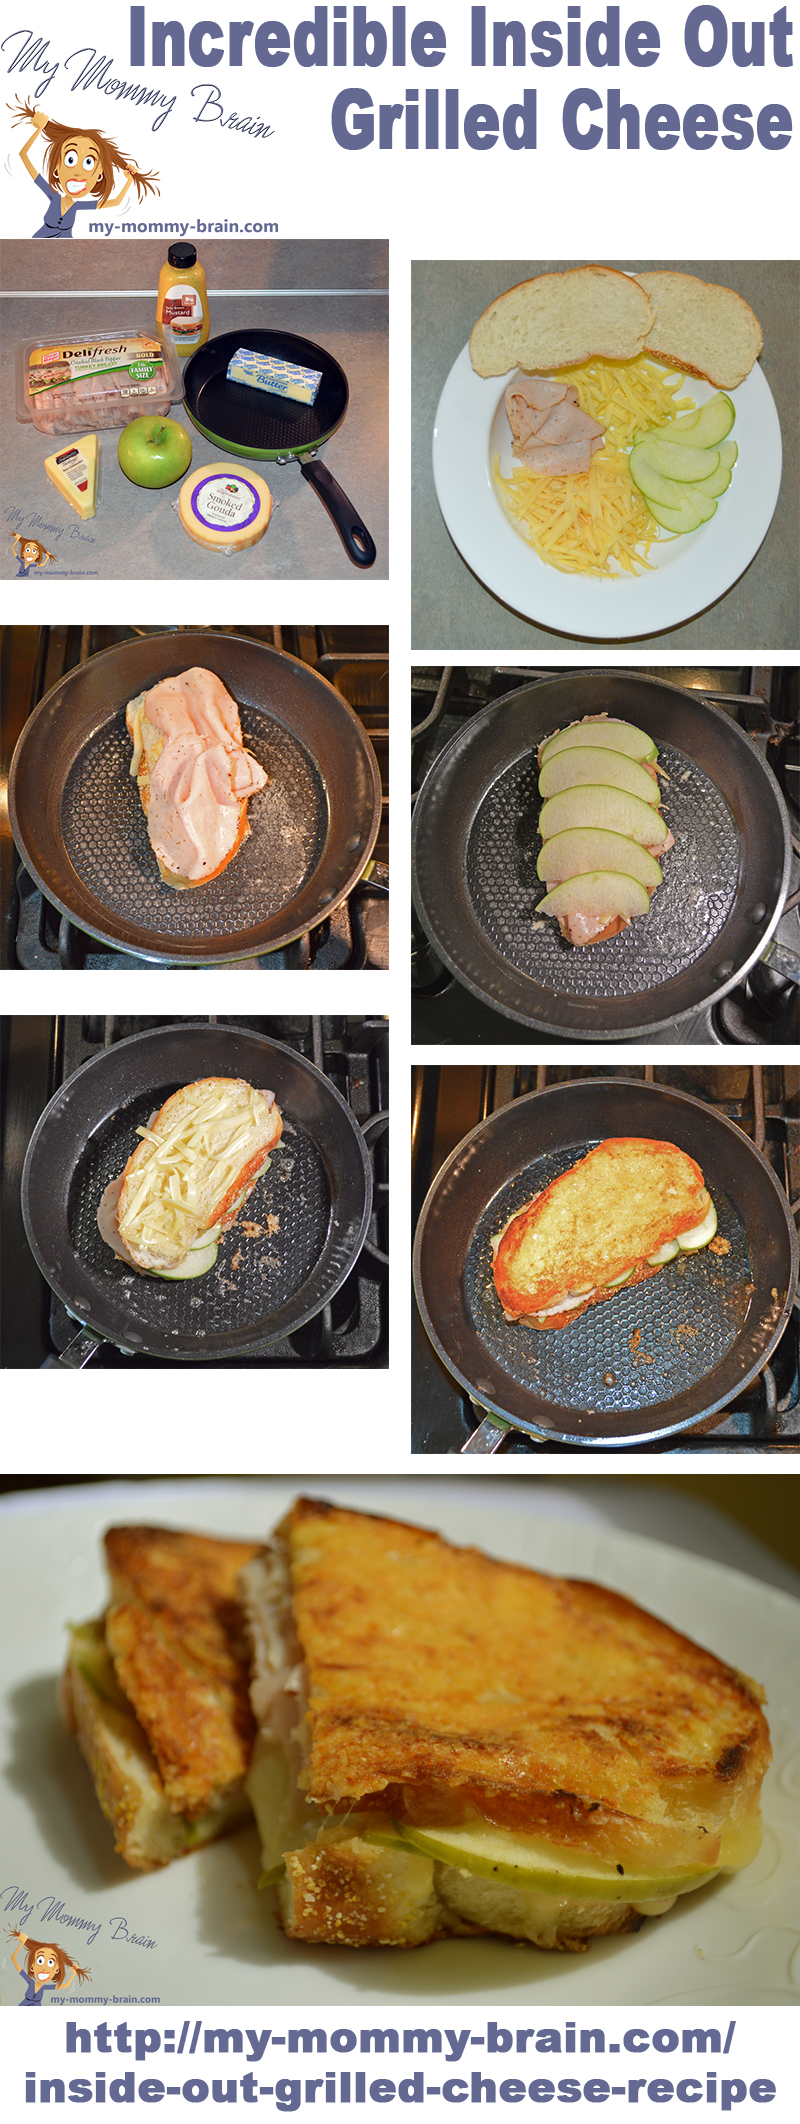 Ingredients : Tasty Tuesday – Incredible Inside Out Grilled Cheese